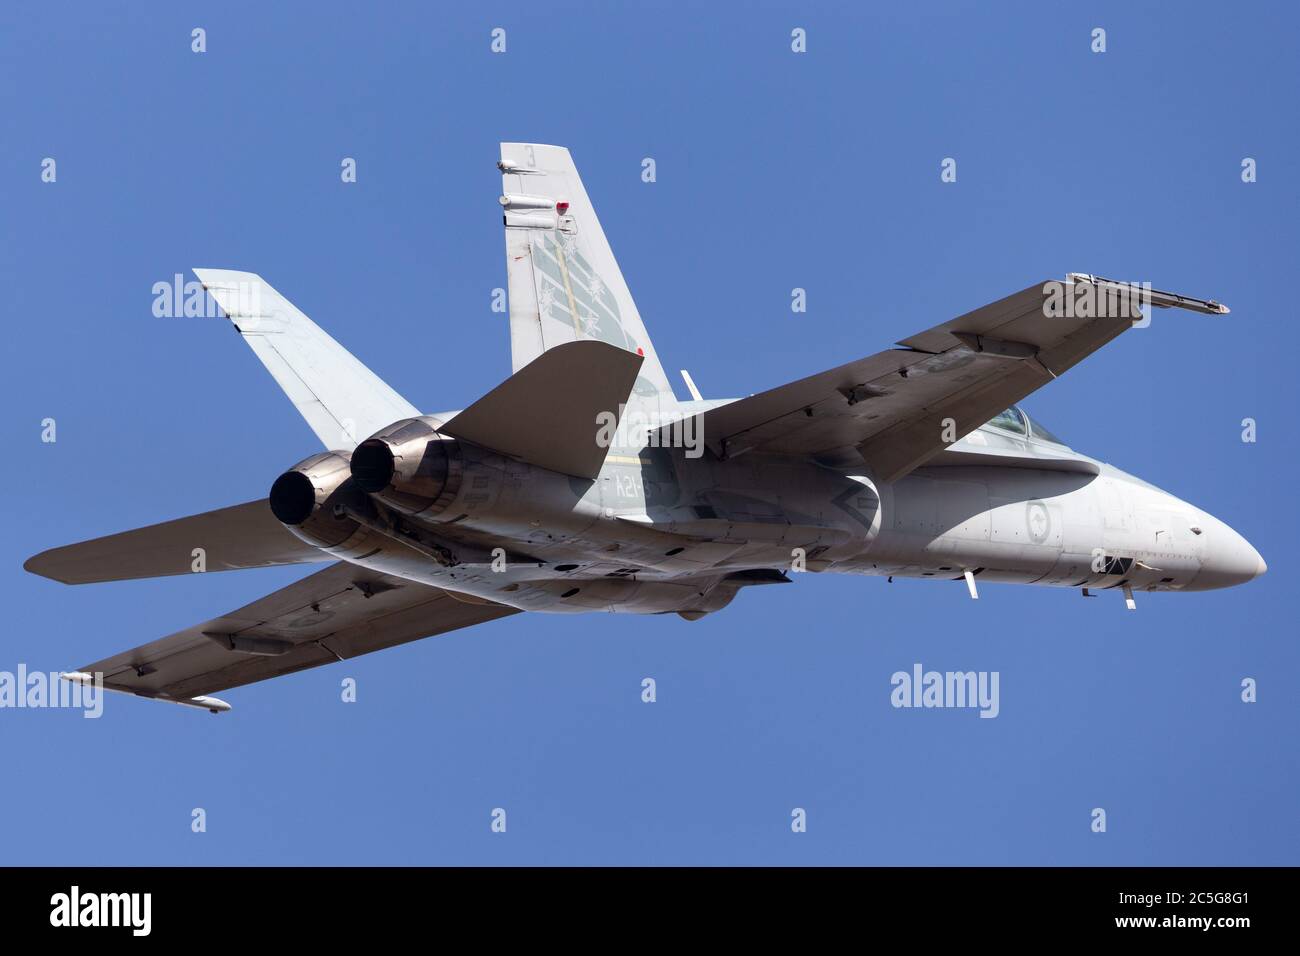 Royal Australian Air Force (RAAF) McDonnell Douglas F/A-18A Hornet multirole fighter aircraft A21-3 from 3 Squadron RAAF Williamtown. Stock Photo